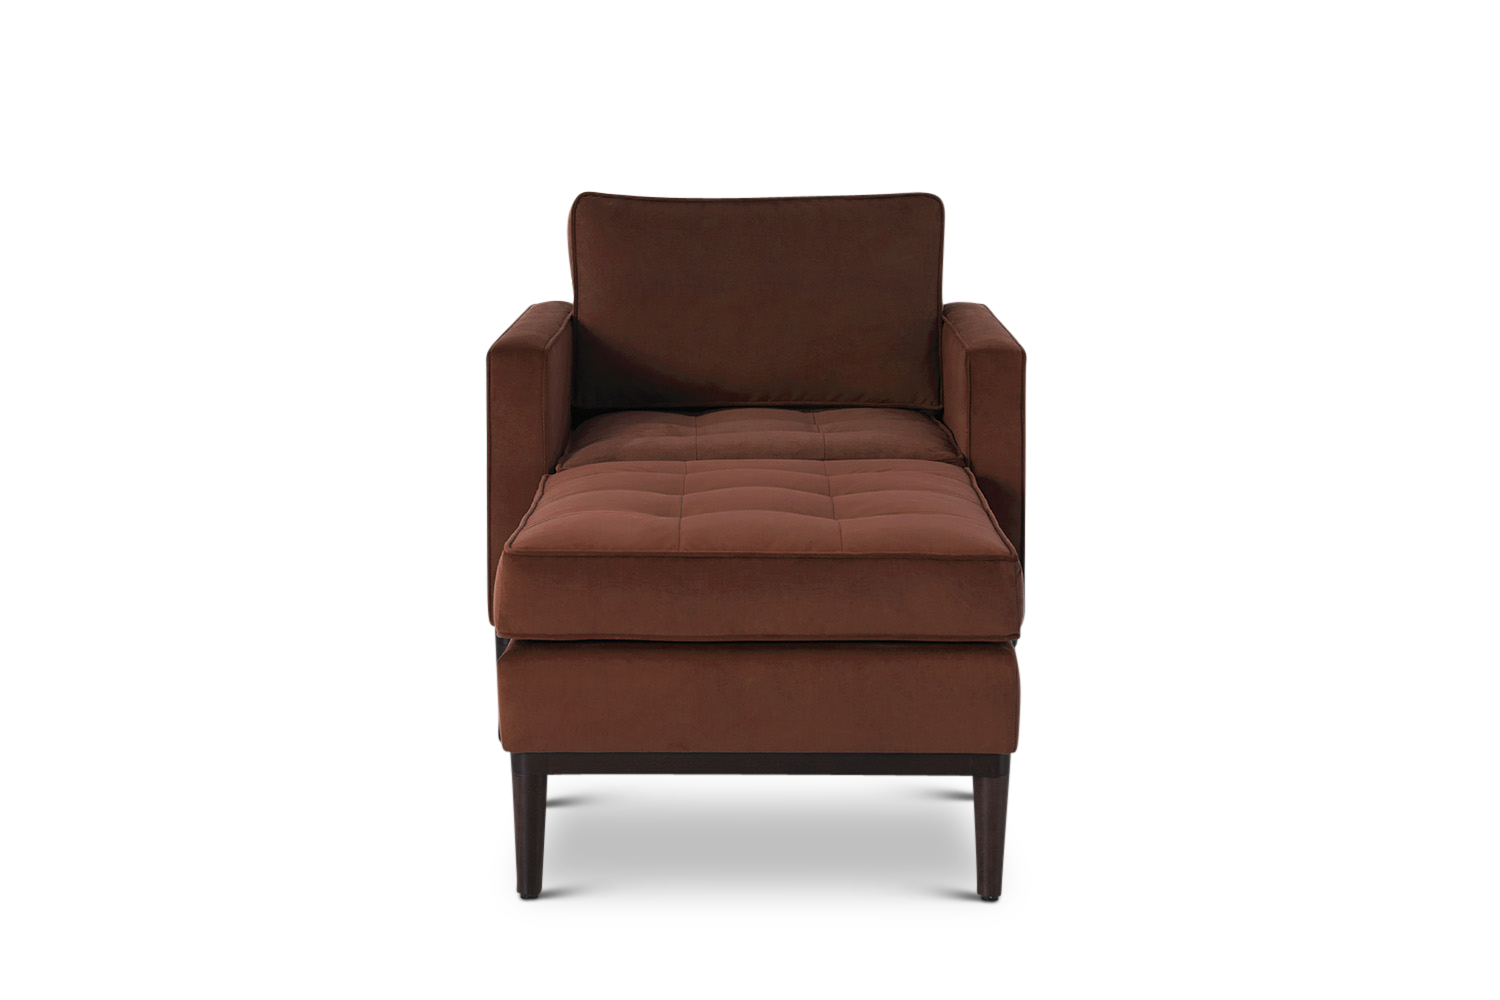 Model 02 Sofas | Quick Swyft Delivery | Mid Sofas Century 